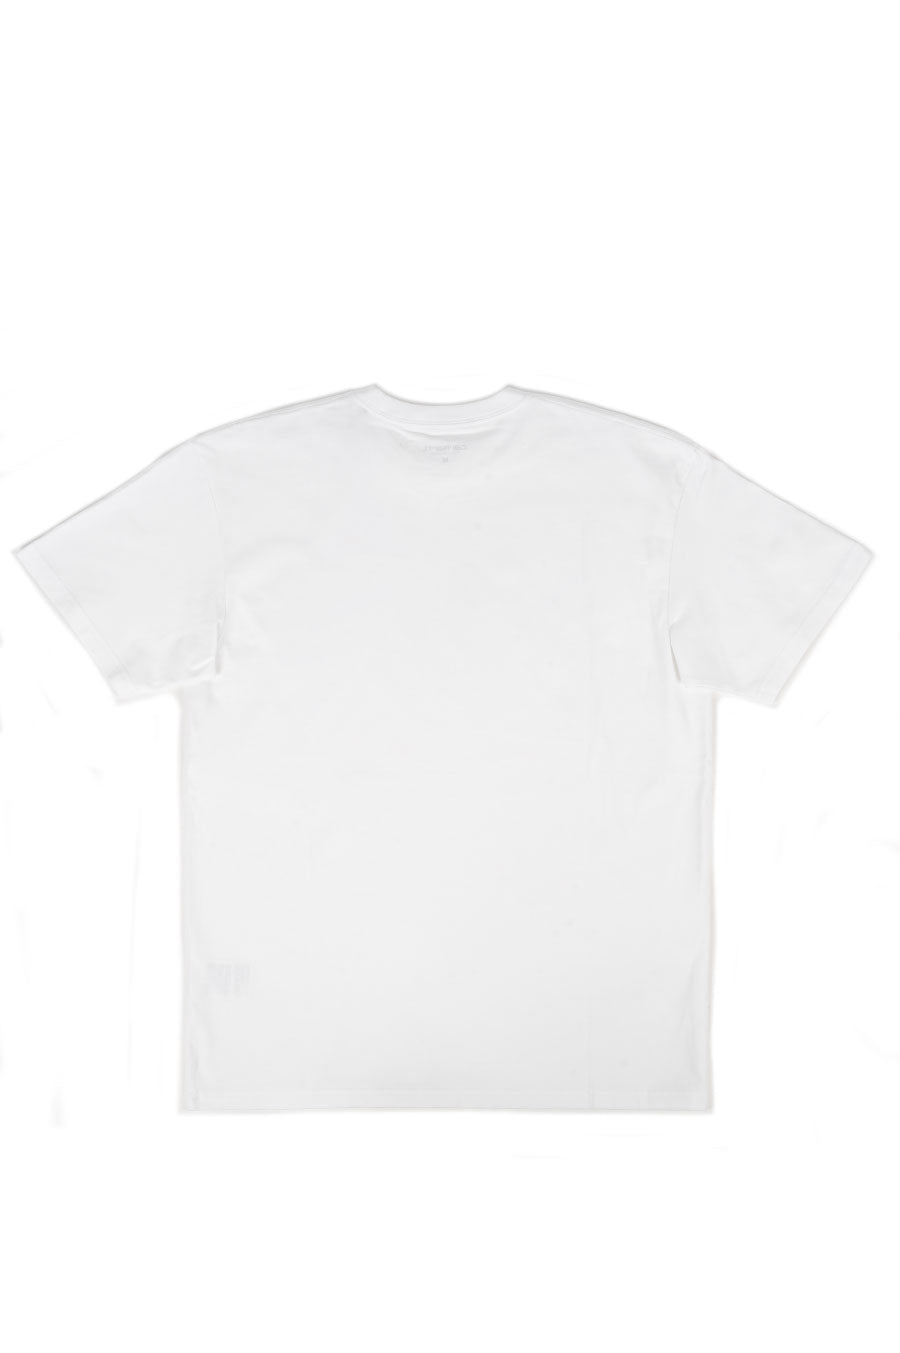 CARHARTT WIP CHASE S/S T-SHIRT WHITE GOLD